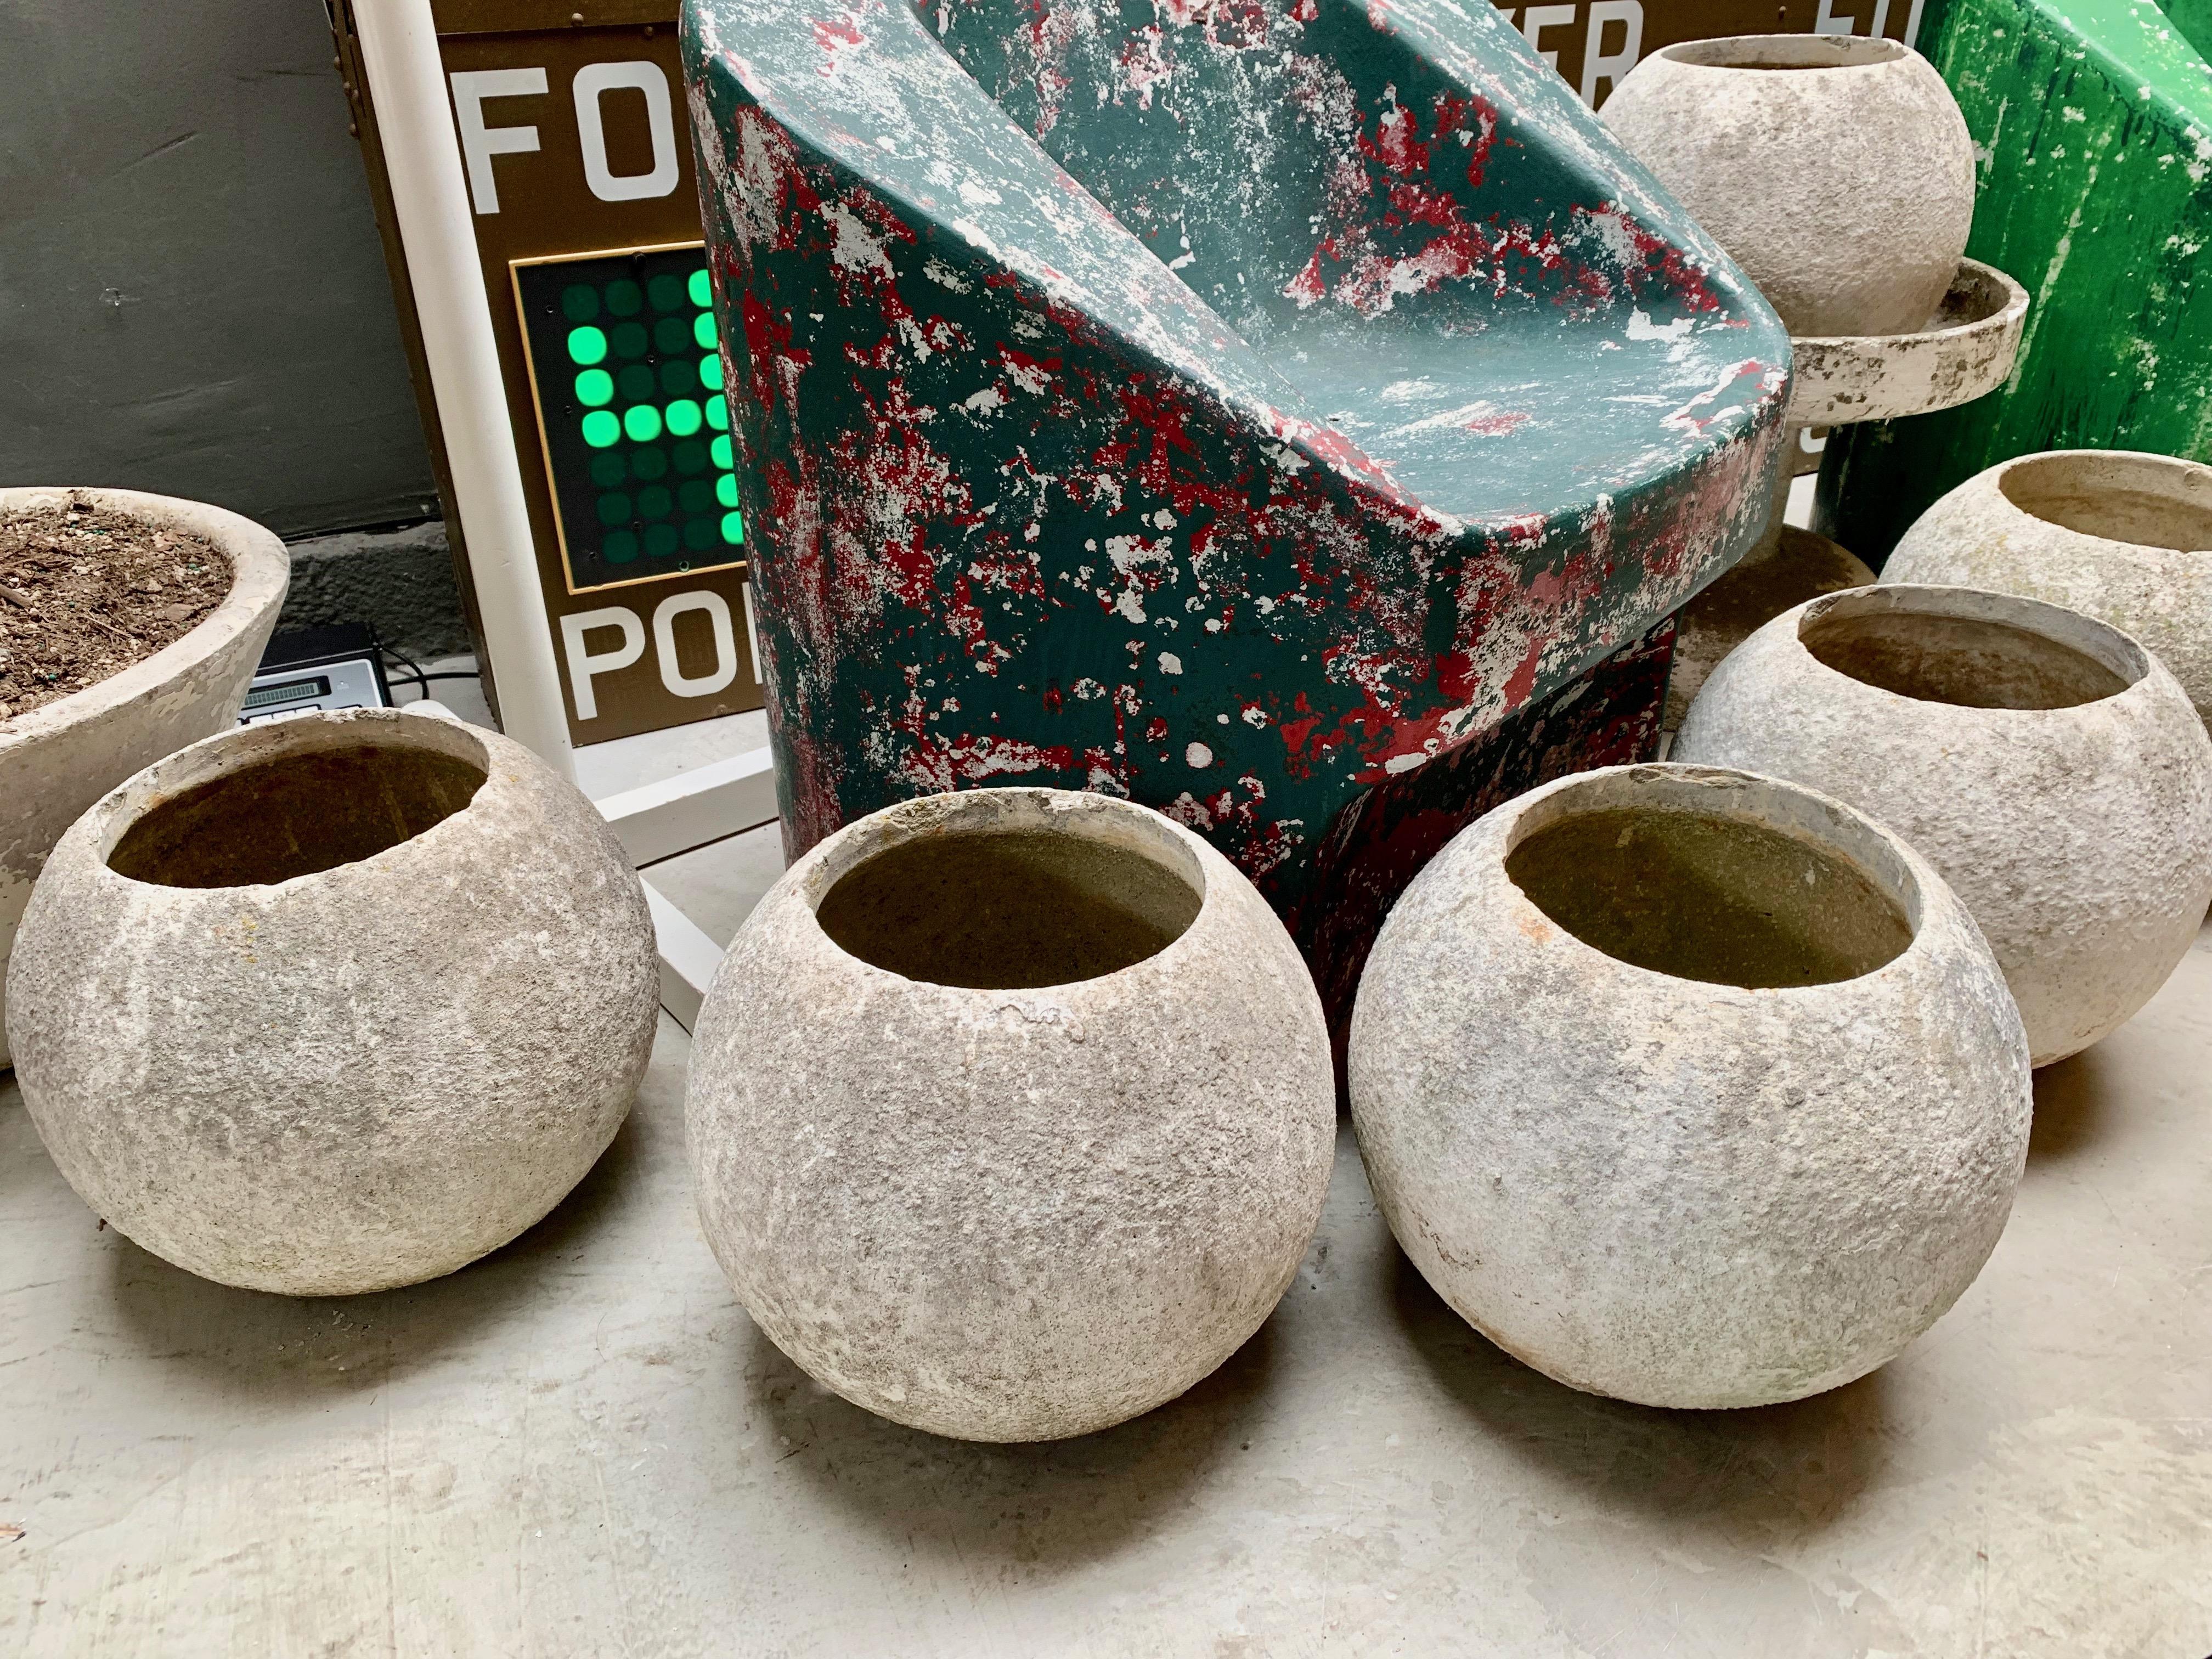 Stunning set of concrete ball planters by Willy Guhl. Never seen before. Great patina to each planter. Concrete balls are 13.5